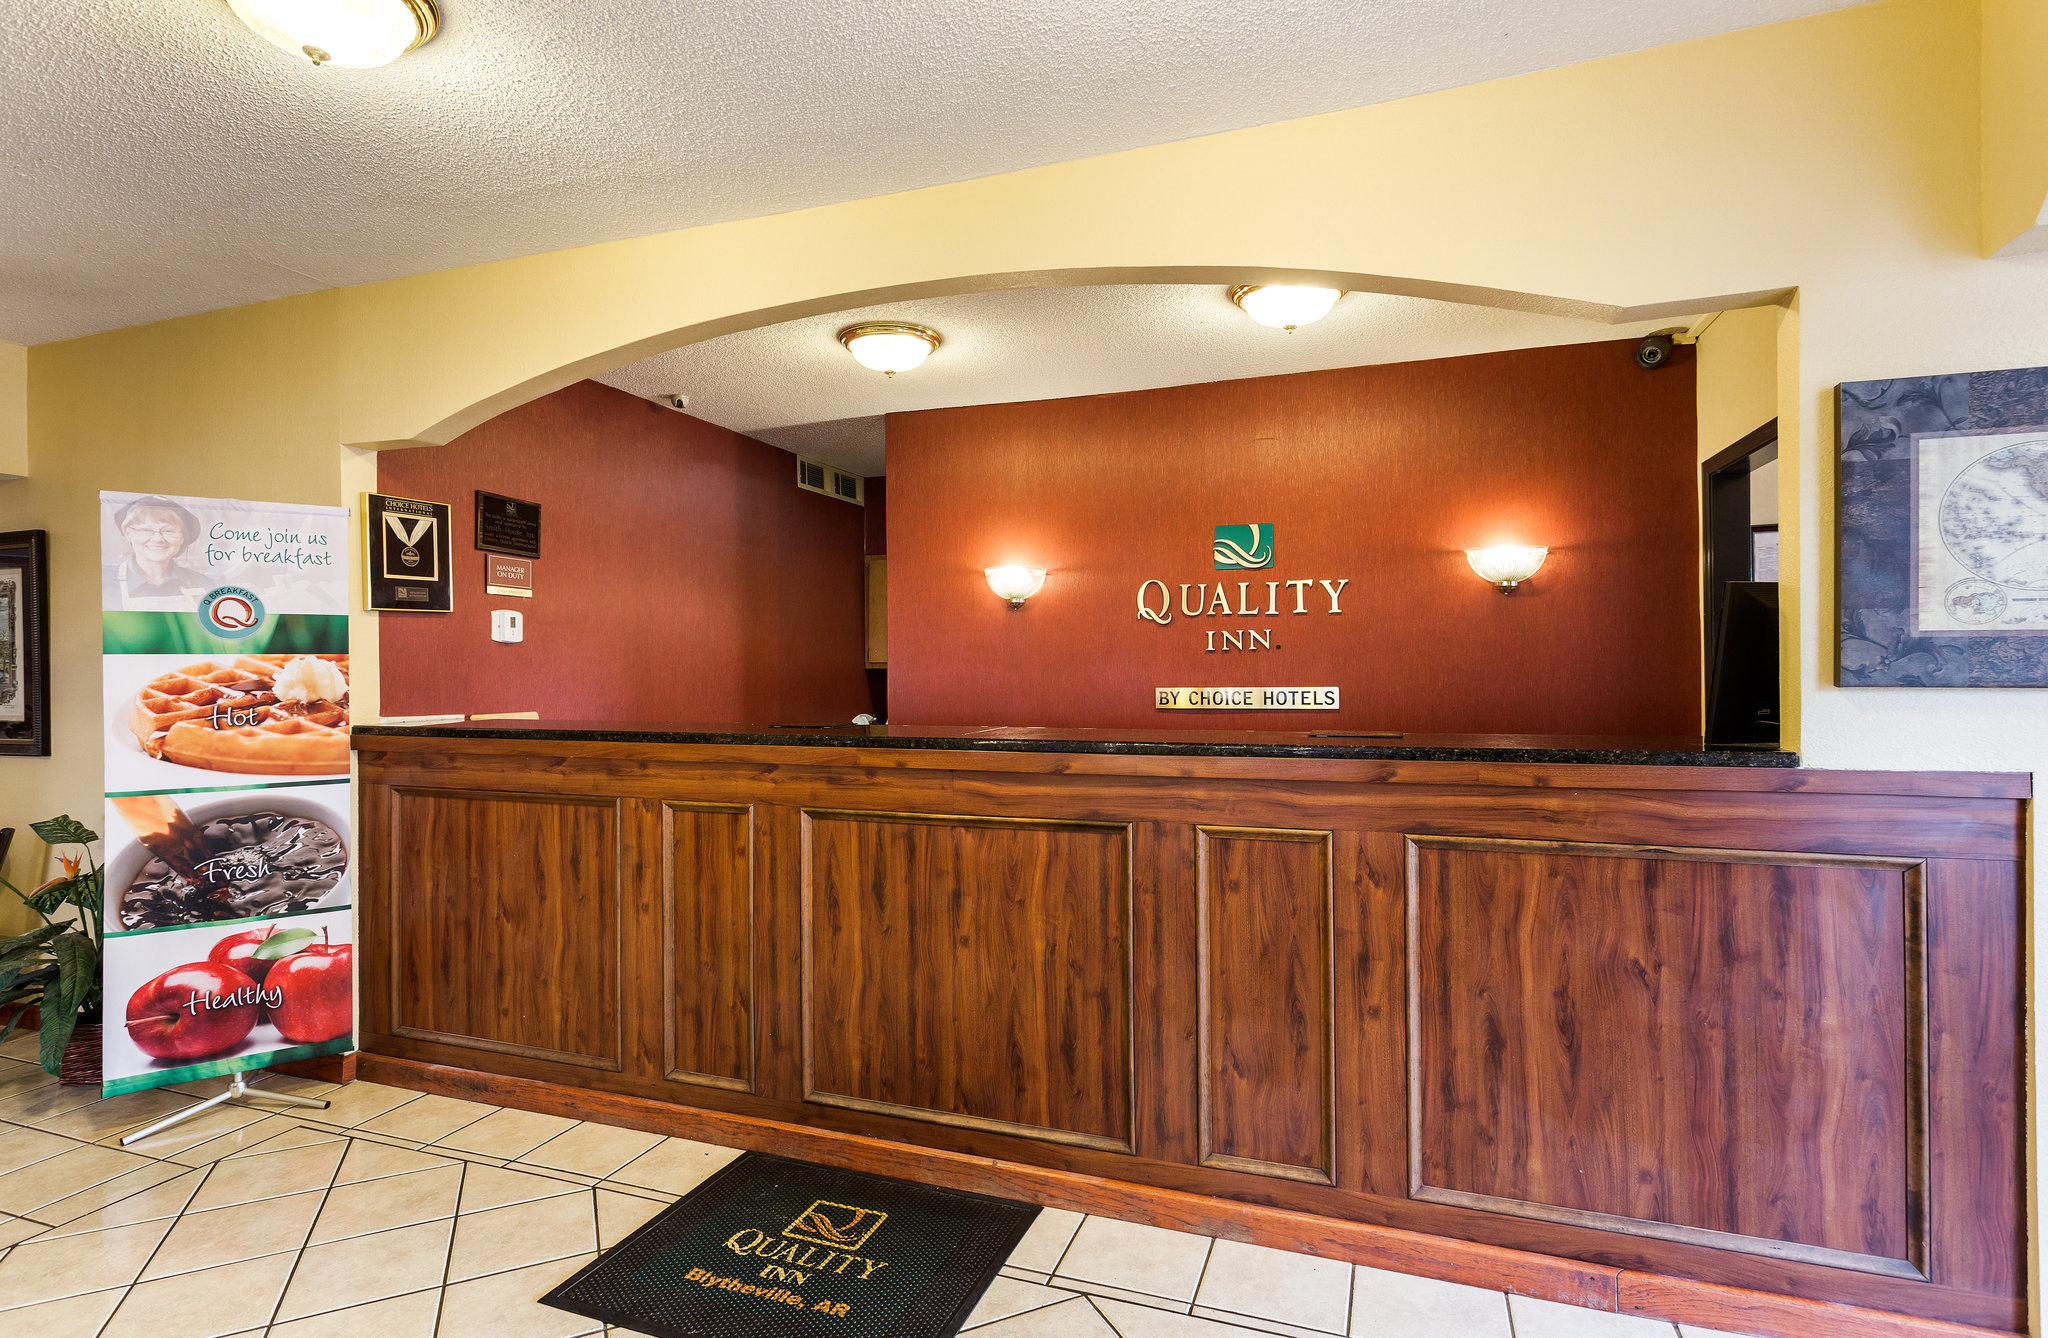 Quality Inn on Historic Route 66